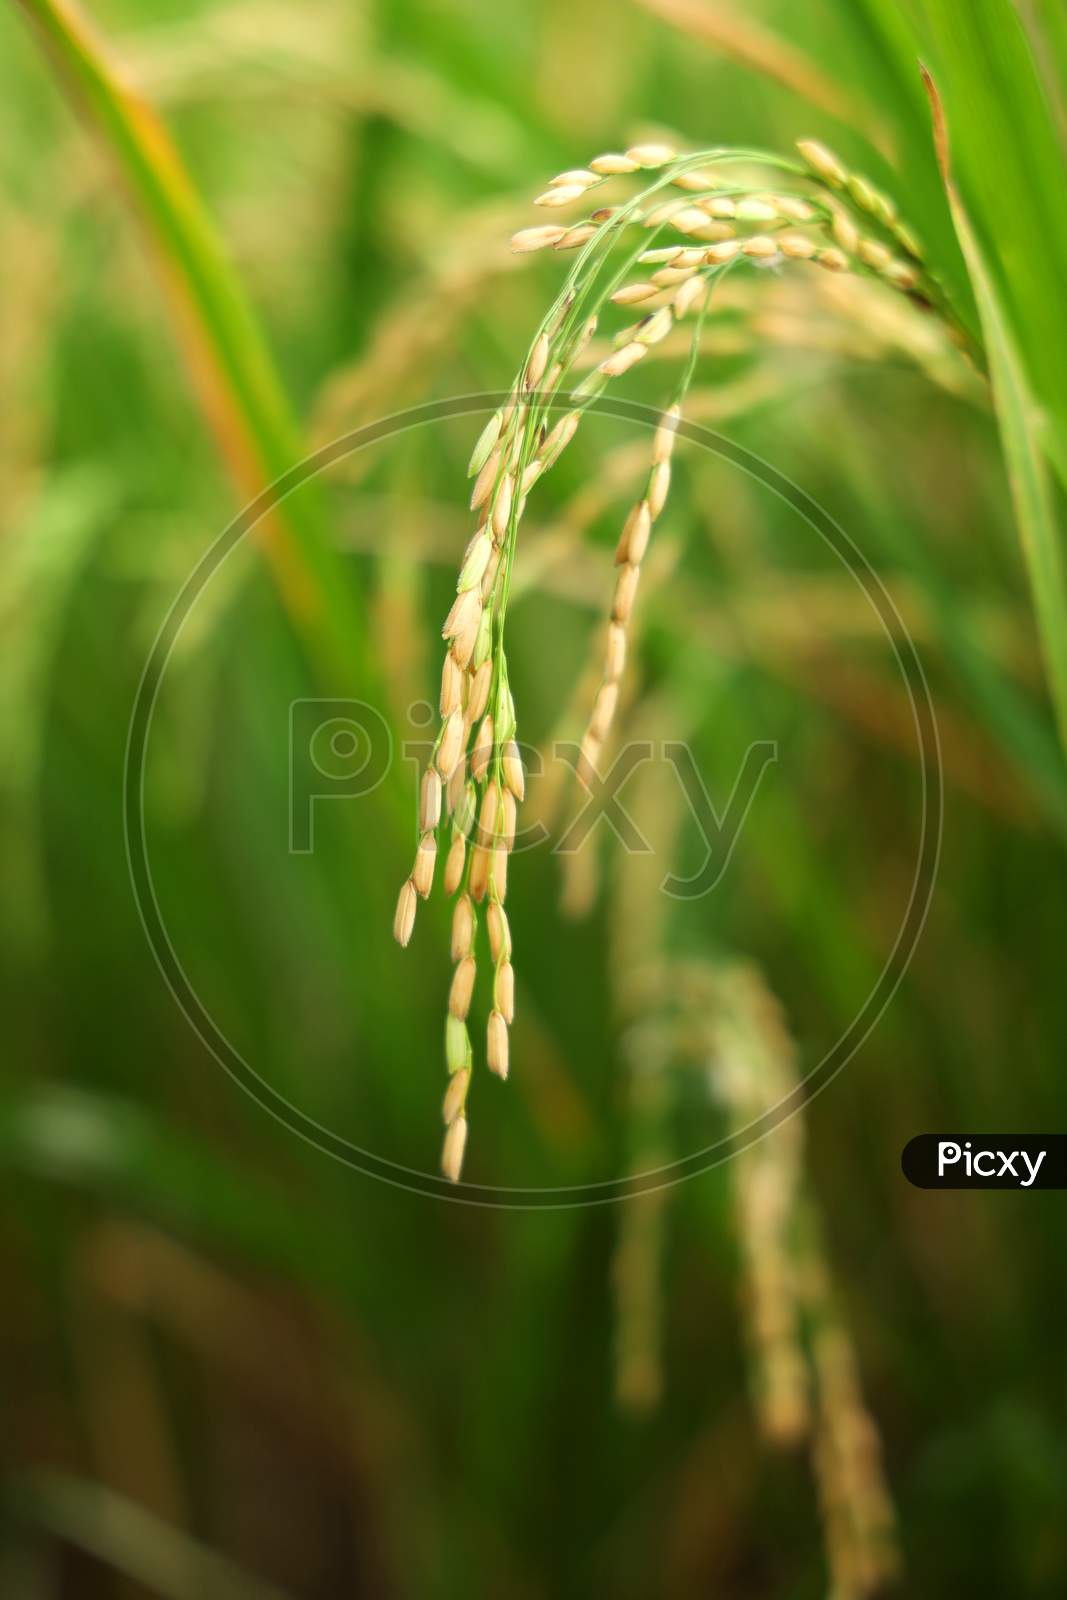 The rice whole grain from the farm field